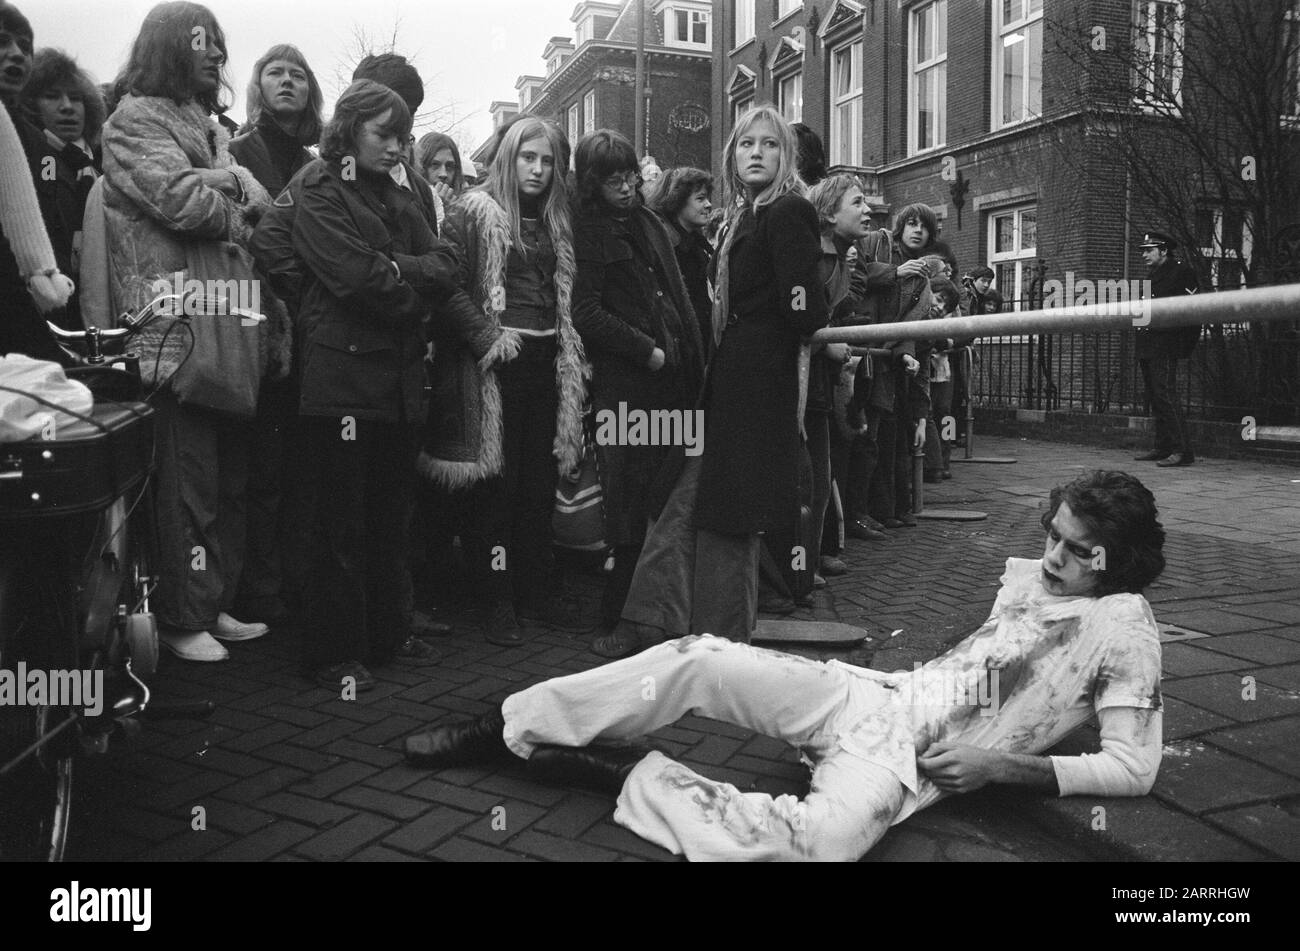 Students strike in Amsterdam to protest against war in Vietnam, protester lying on the ground for Consulate Date: January 18, 1973 Location: Amsterdam, Noord-Holland Keywords: CONSULATES, SCHOLICATES, Wars, Protests Stock Photo